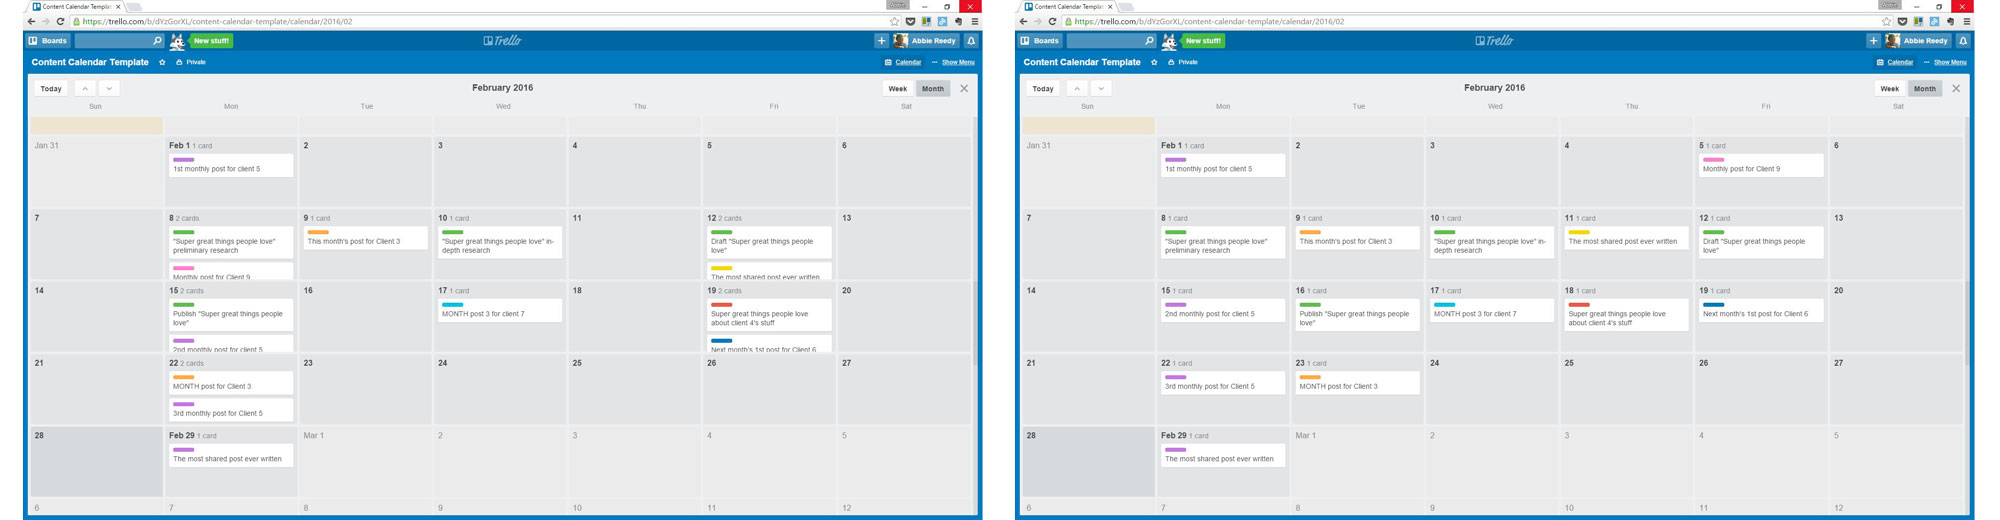 How to Create a MultiClient Content Calendar with Trello Heroic Search